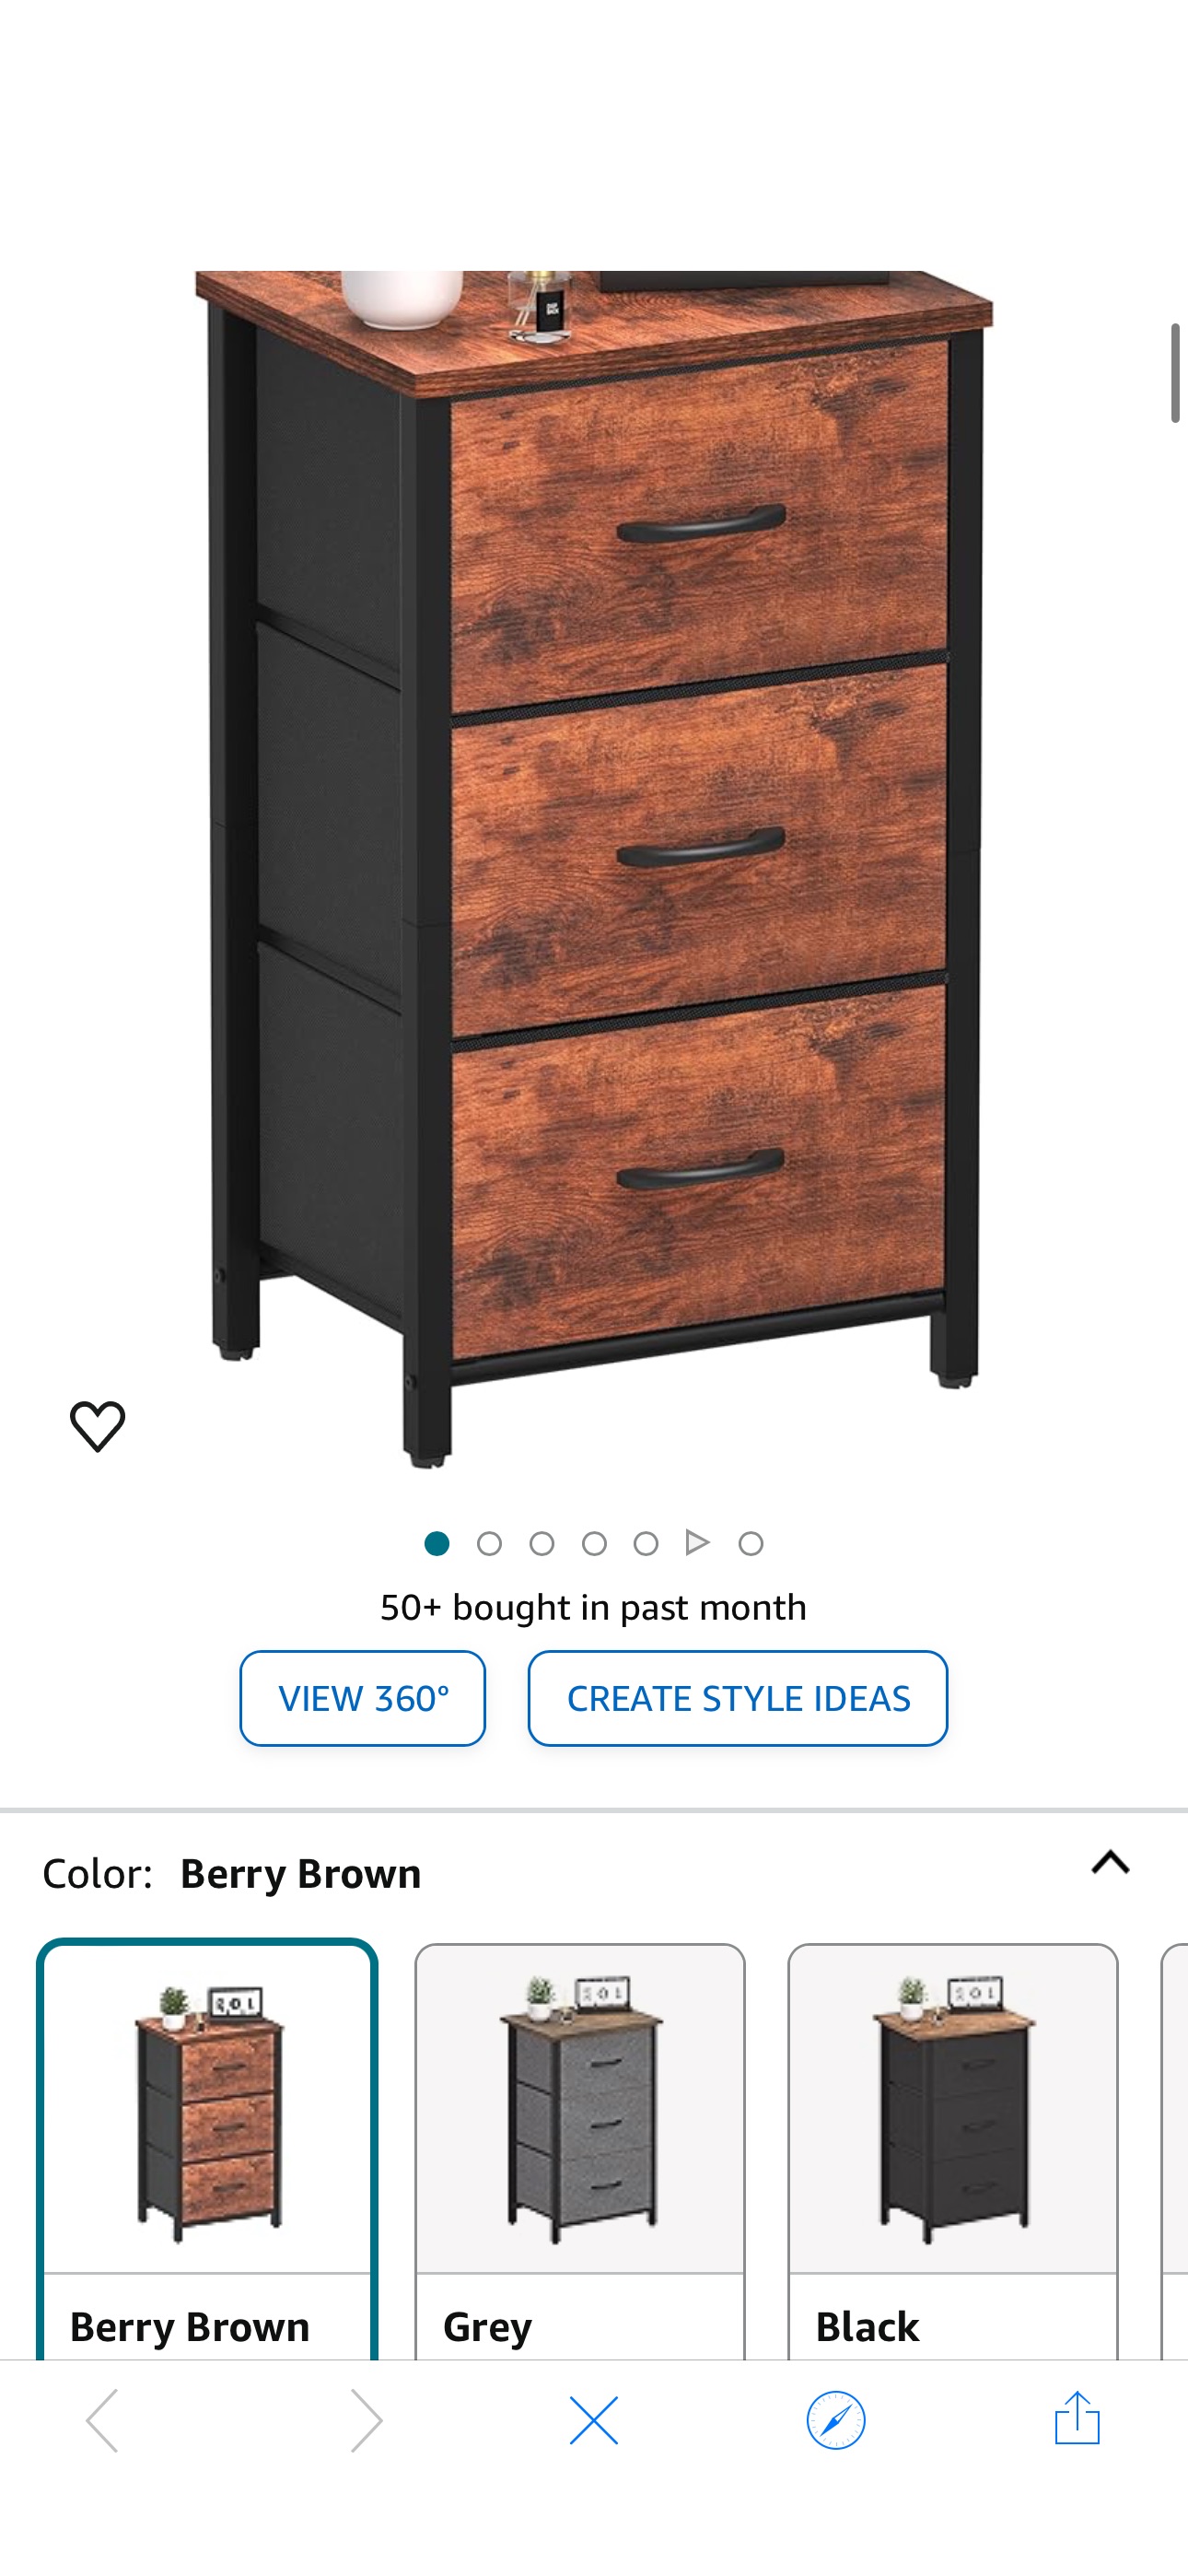 Amazon.com: Yoobure Nightstand with 3 Fabric Drawers, Storage Drawers Small Dresser for Bedroom, $15.99 Nightstand with 3 Fabric Drawers
Use code: 50P7WVDR